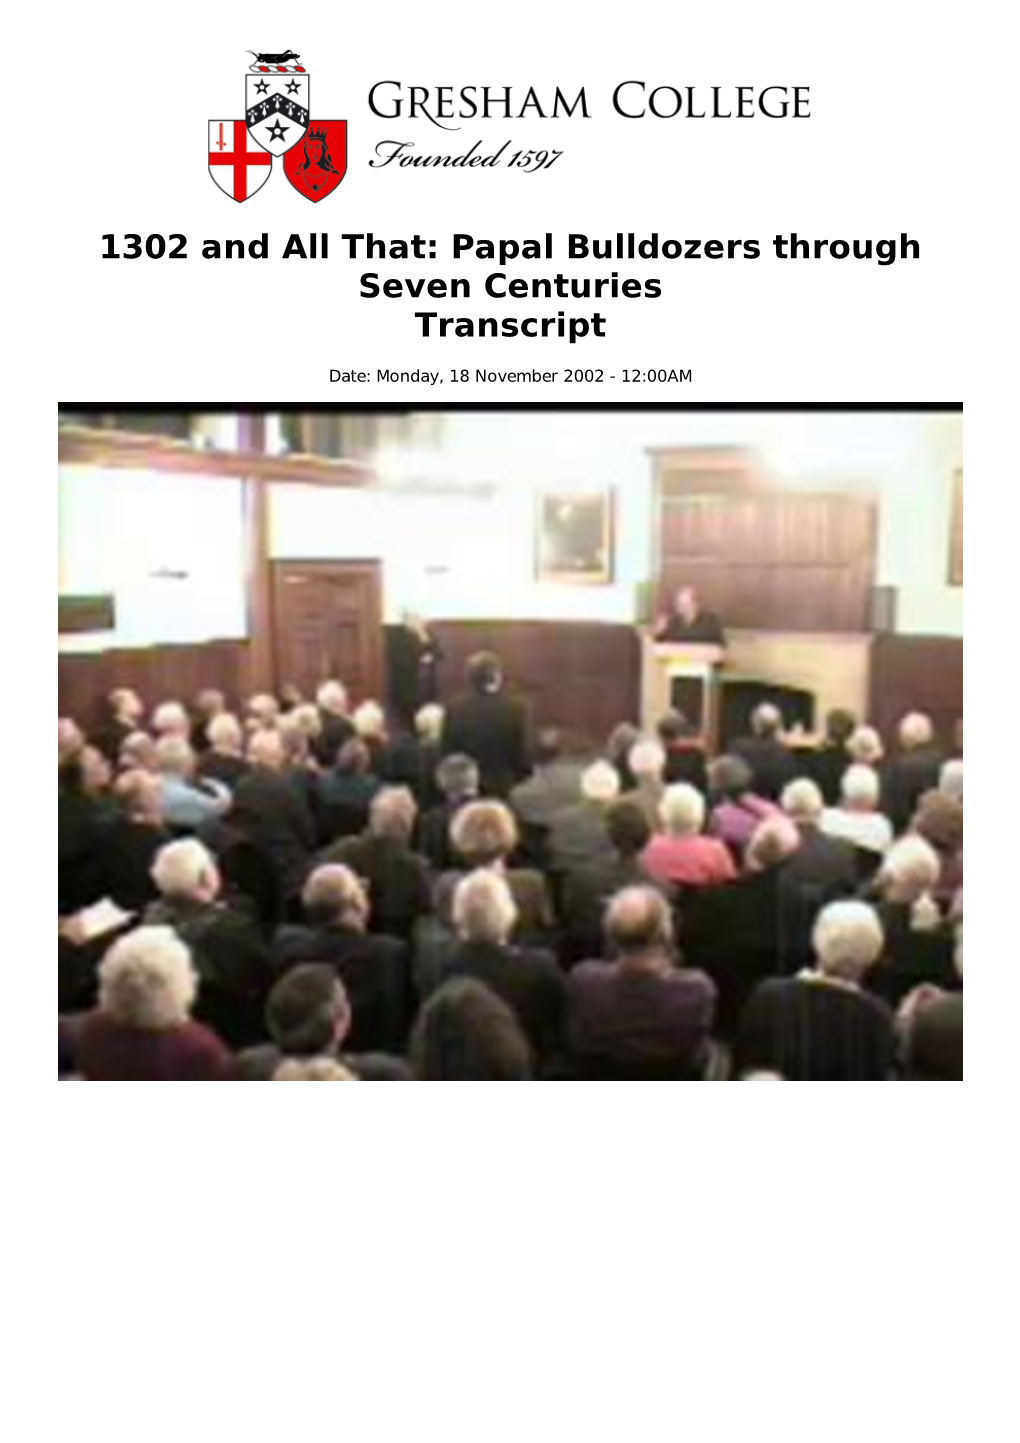 1302 and All That: Papal Bulldozers Through Seven Centuries Transcript